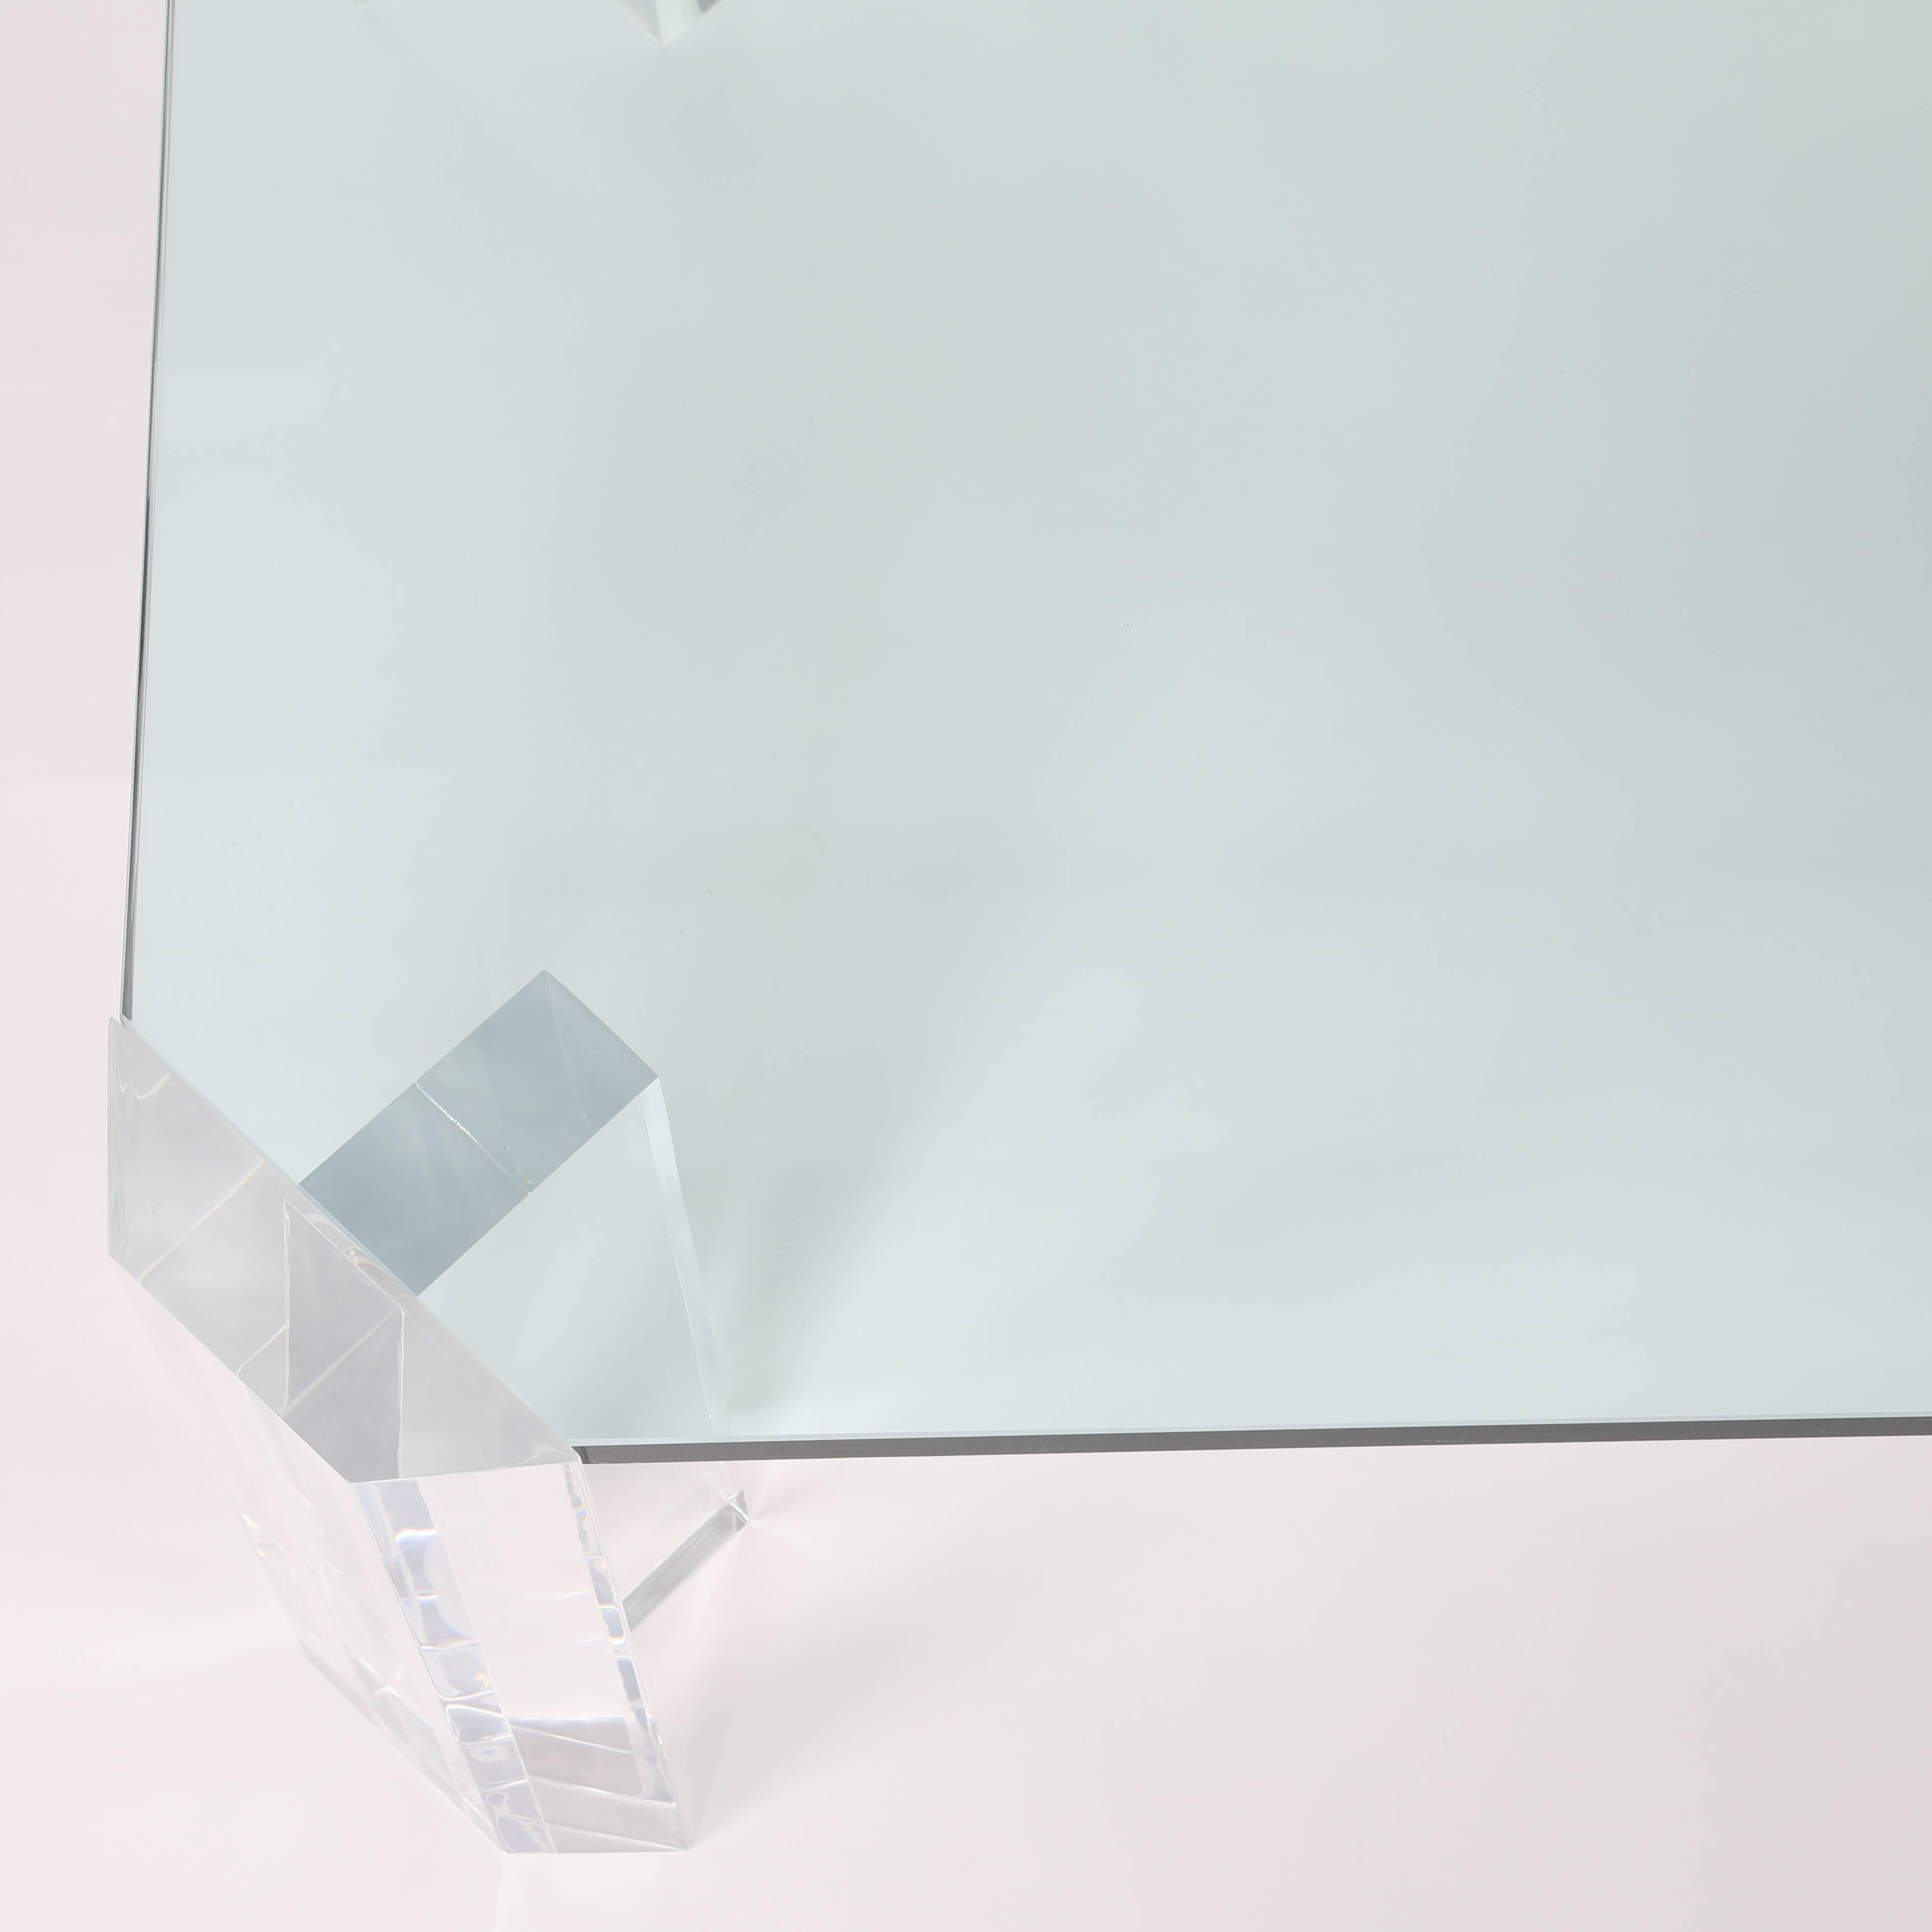 Rectangular 1970s Glass Cocktail Table with Clipped Corners and Lucite Supports For Sale 2